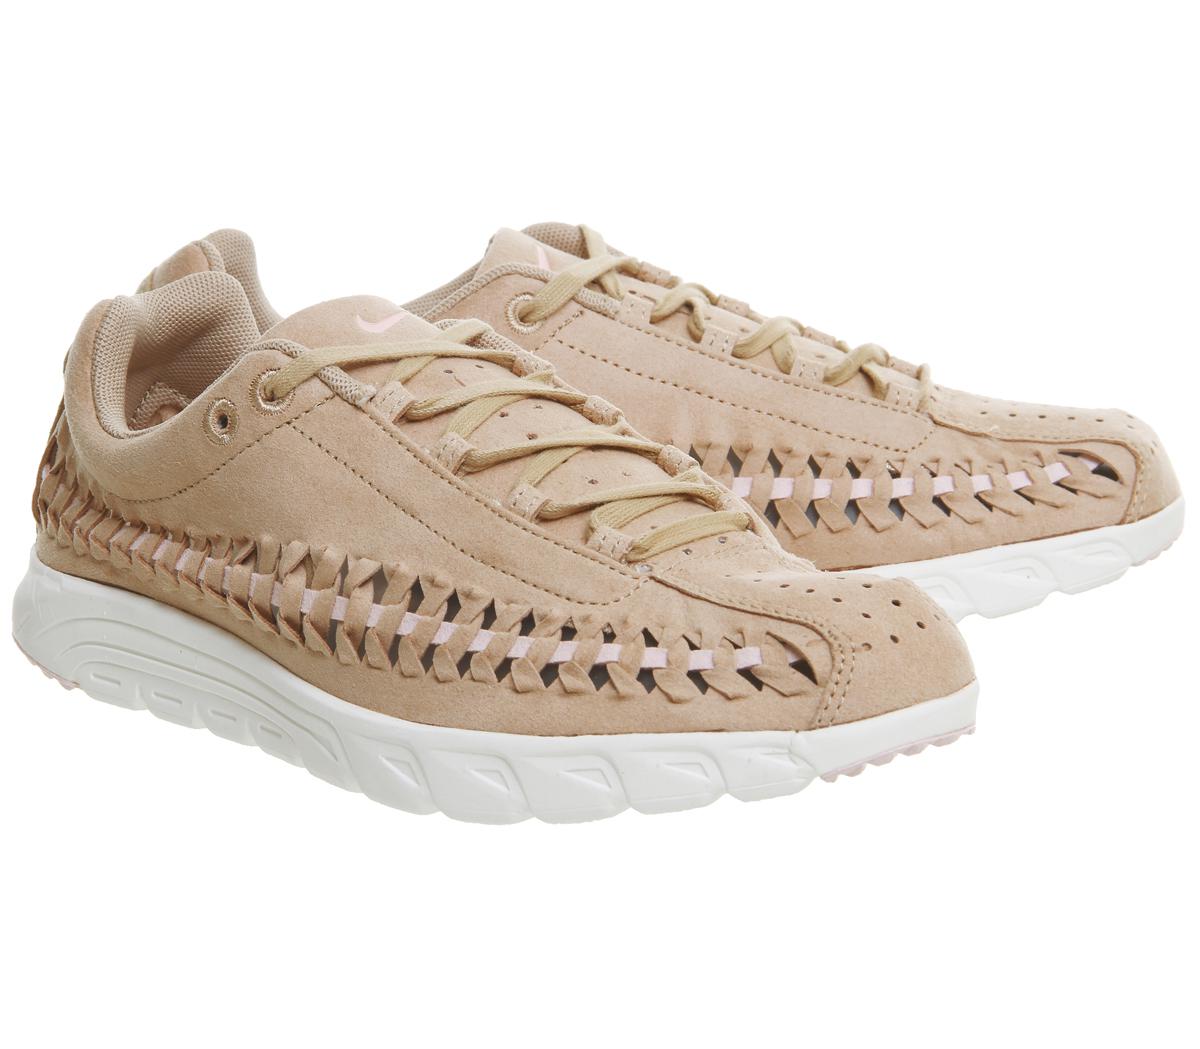 Nike Suede Mayfly Woven Trainers - Lyst